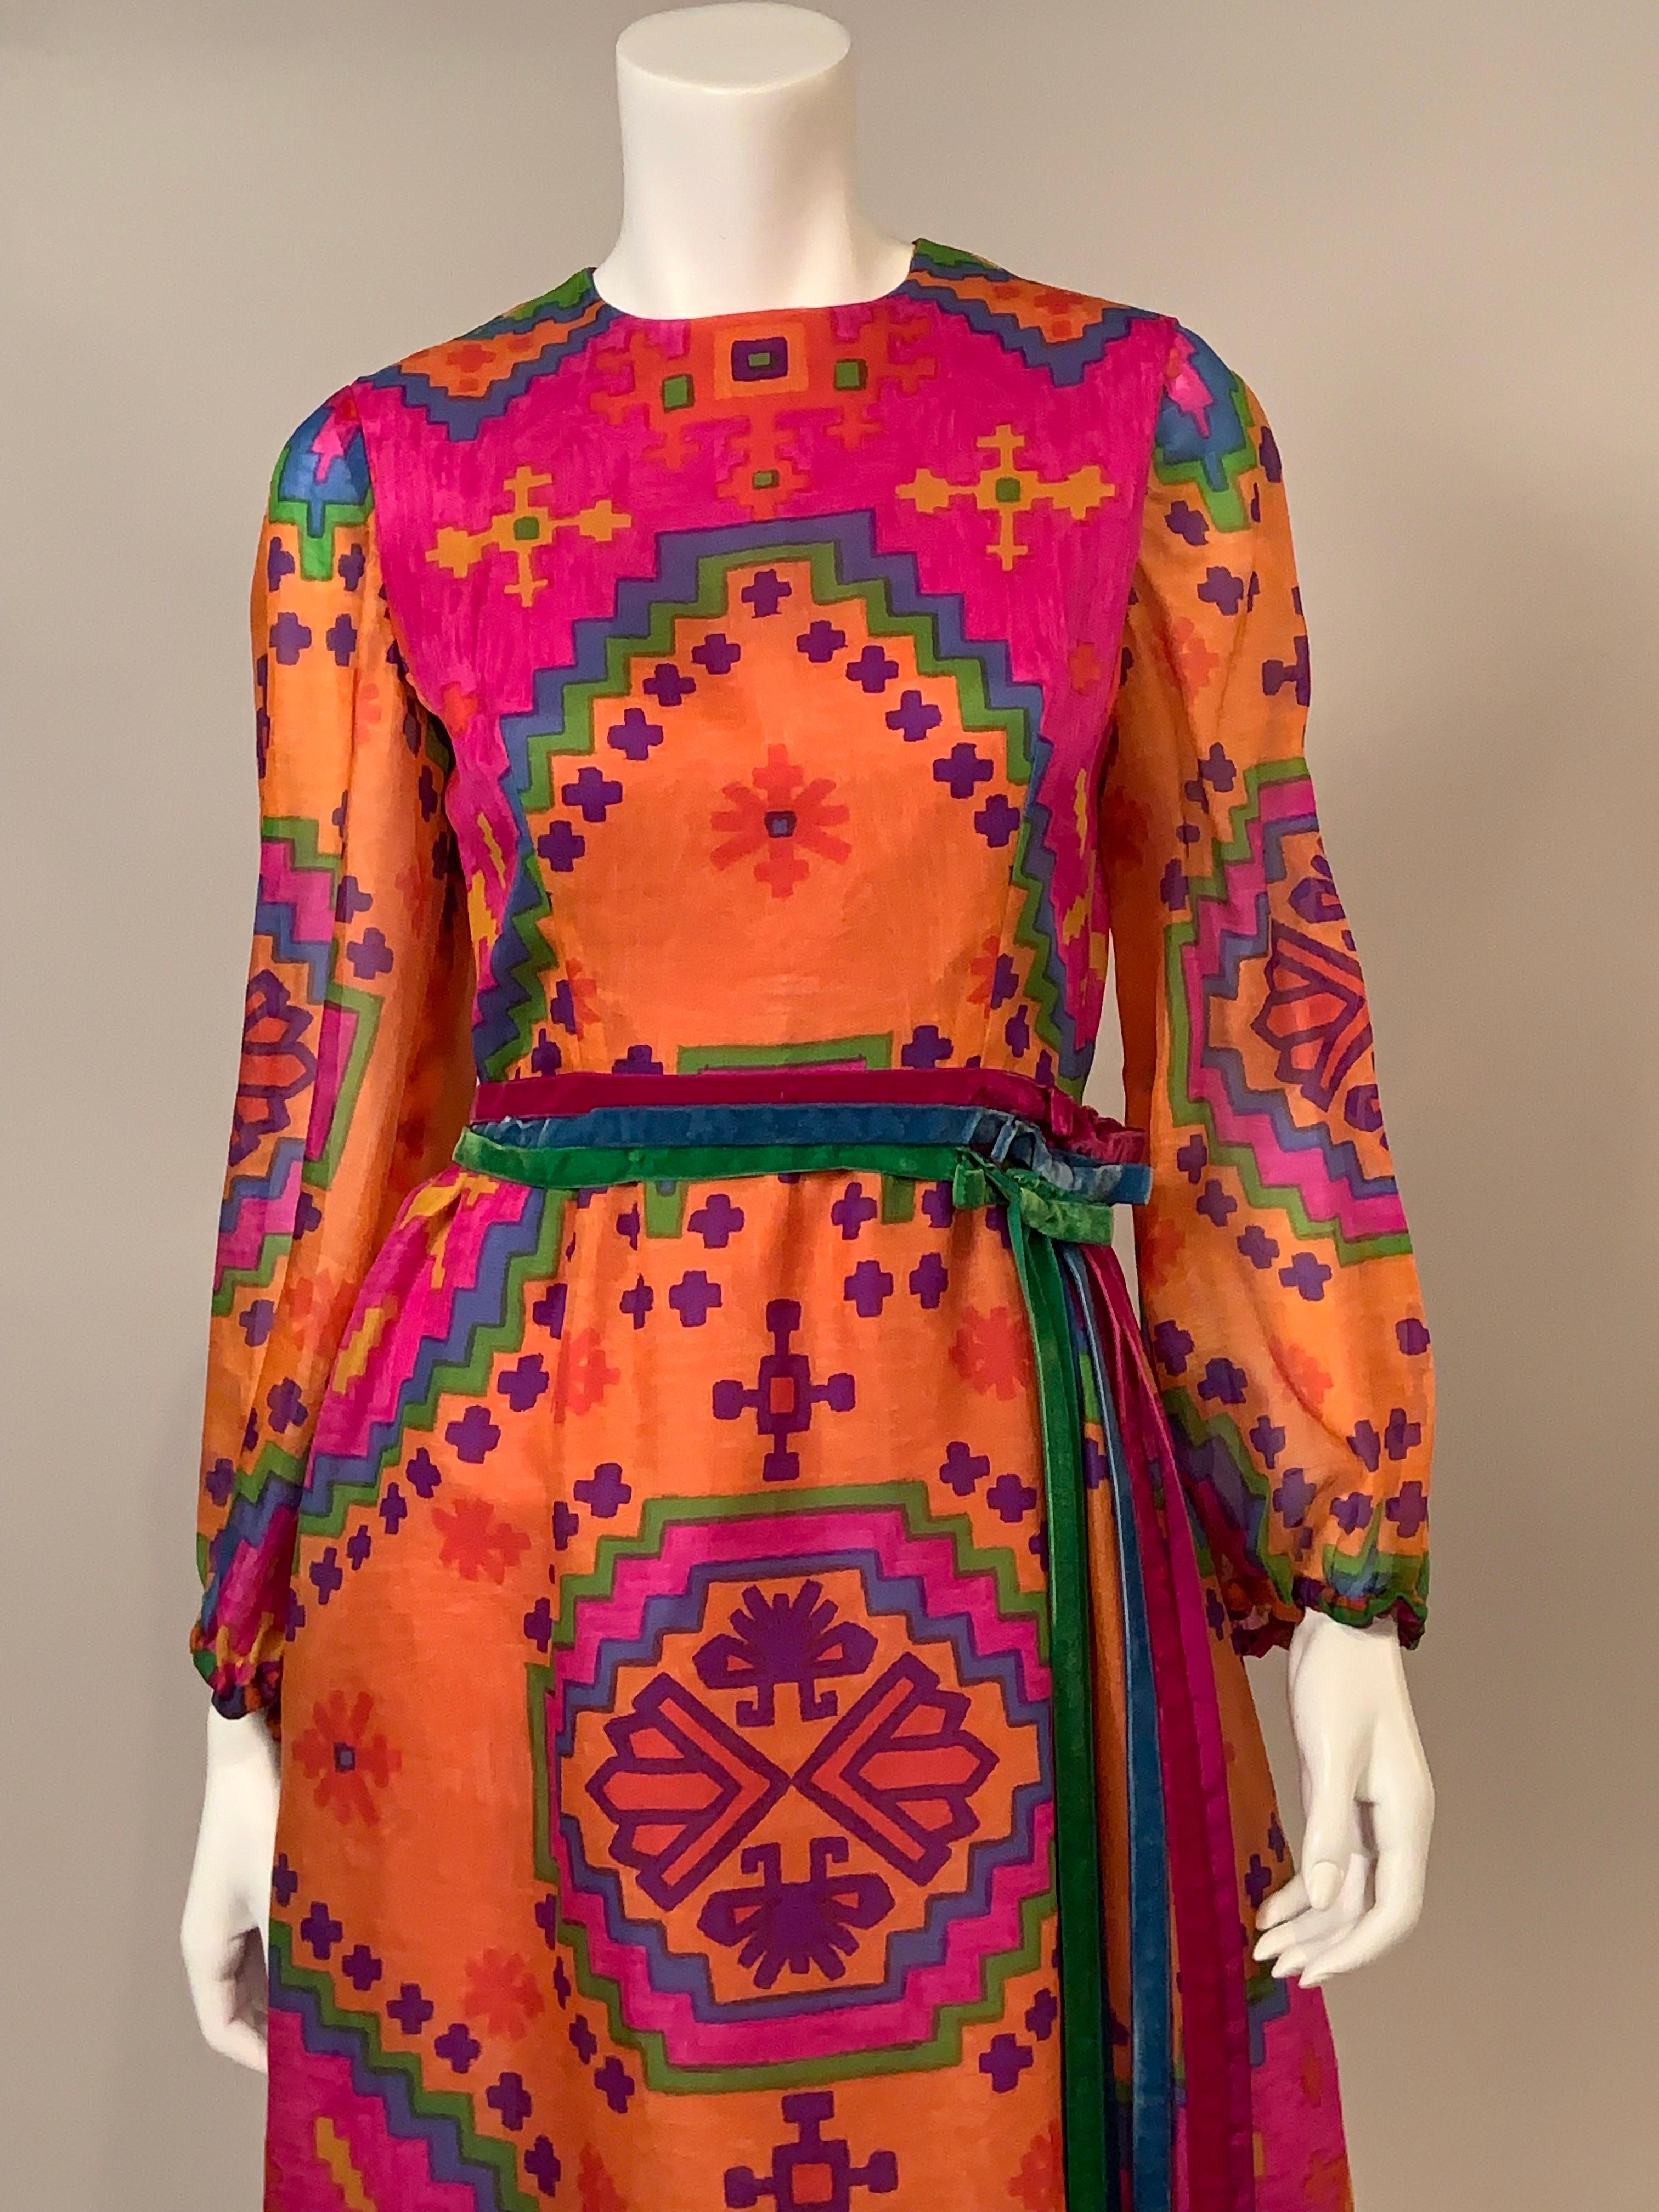 Chester Weinberg was a contemporary of Oscar de la Renta, Bill Blass and Geoffrey Beene and a recipient of The Coty Award in 1970.  This colorful silk organza print dress is a great example of his work.  The ethnic inspired print dress in hot pink,